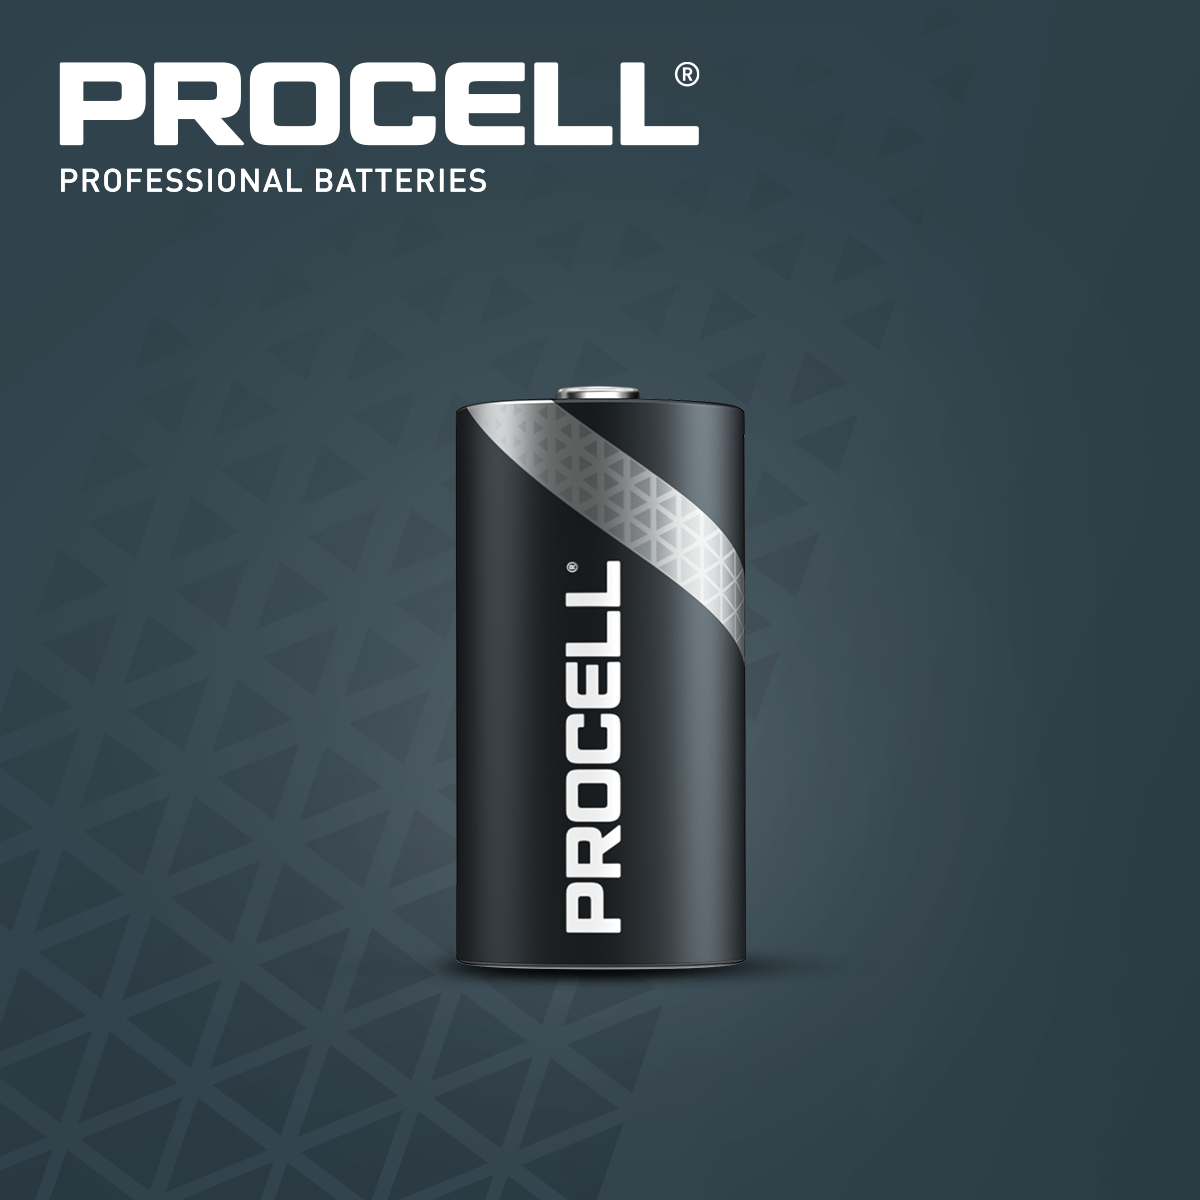 Duracell Procell Lithium Manganese Dioxide 3V, CR123A Battery